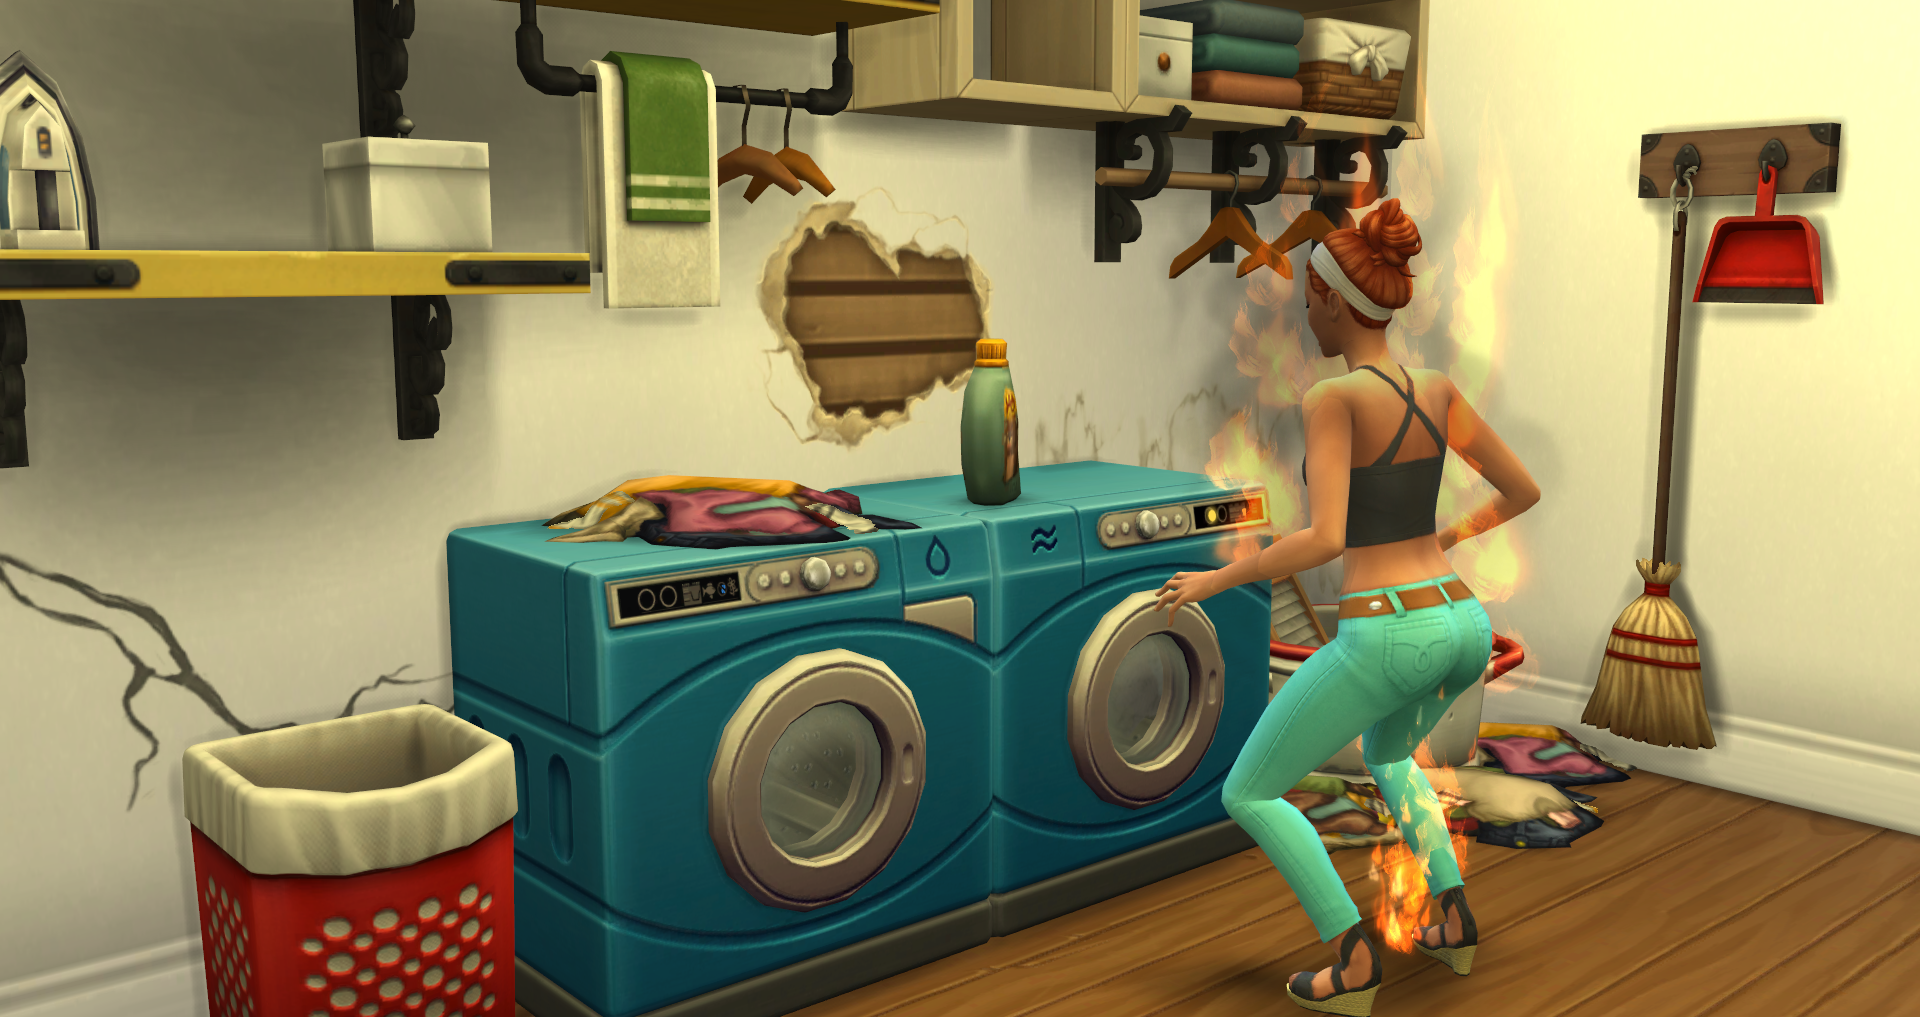 Laundry day. Laundry Day SIMS 4. Симс 4 Laundry Day stuff. SIMS 4 Laundry cc. Сушилка симс 4.